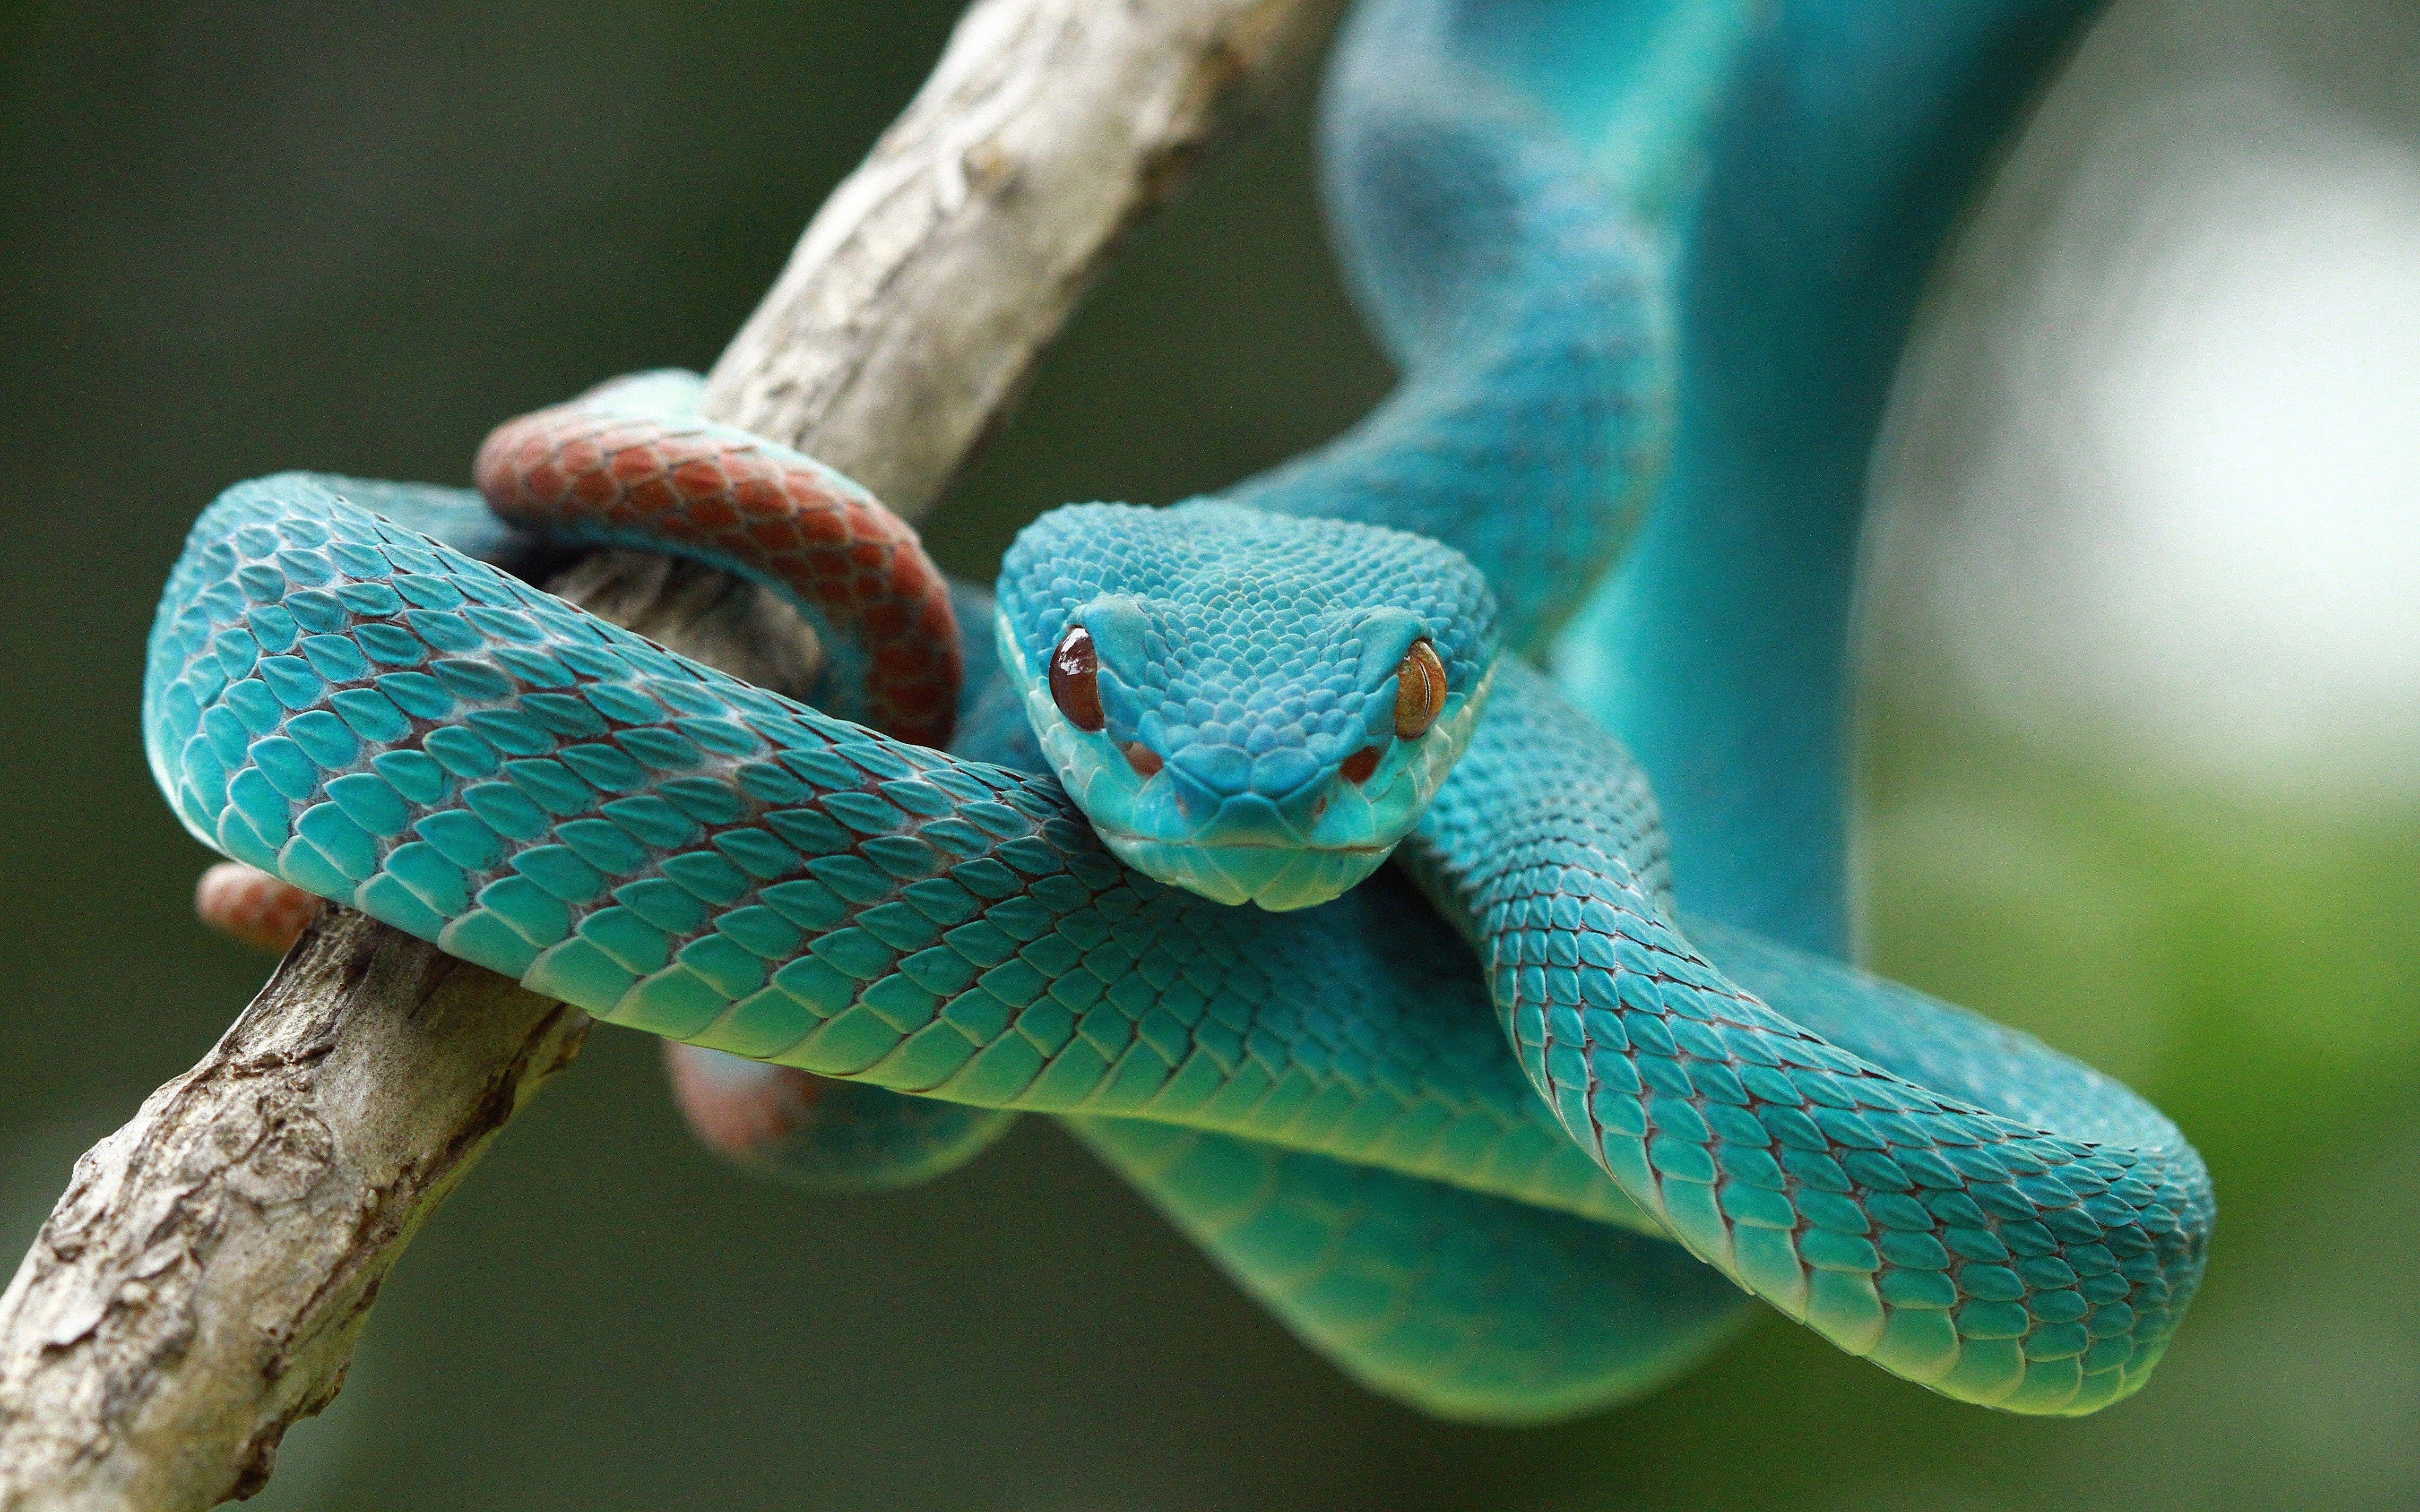 Free Blue Snake Photos and Vectors